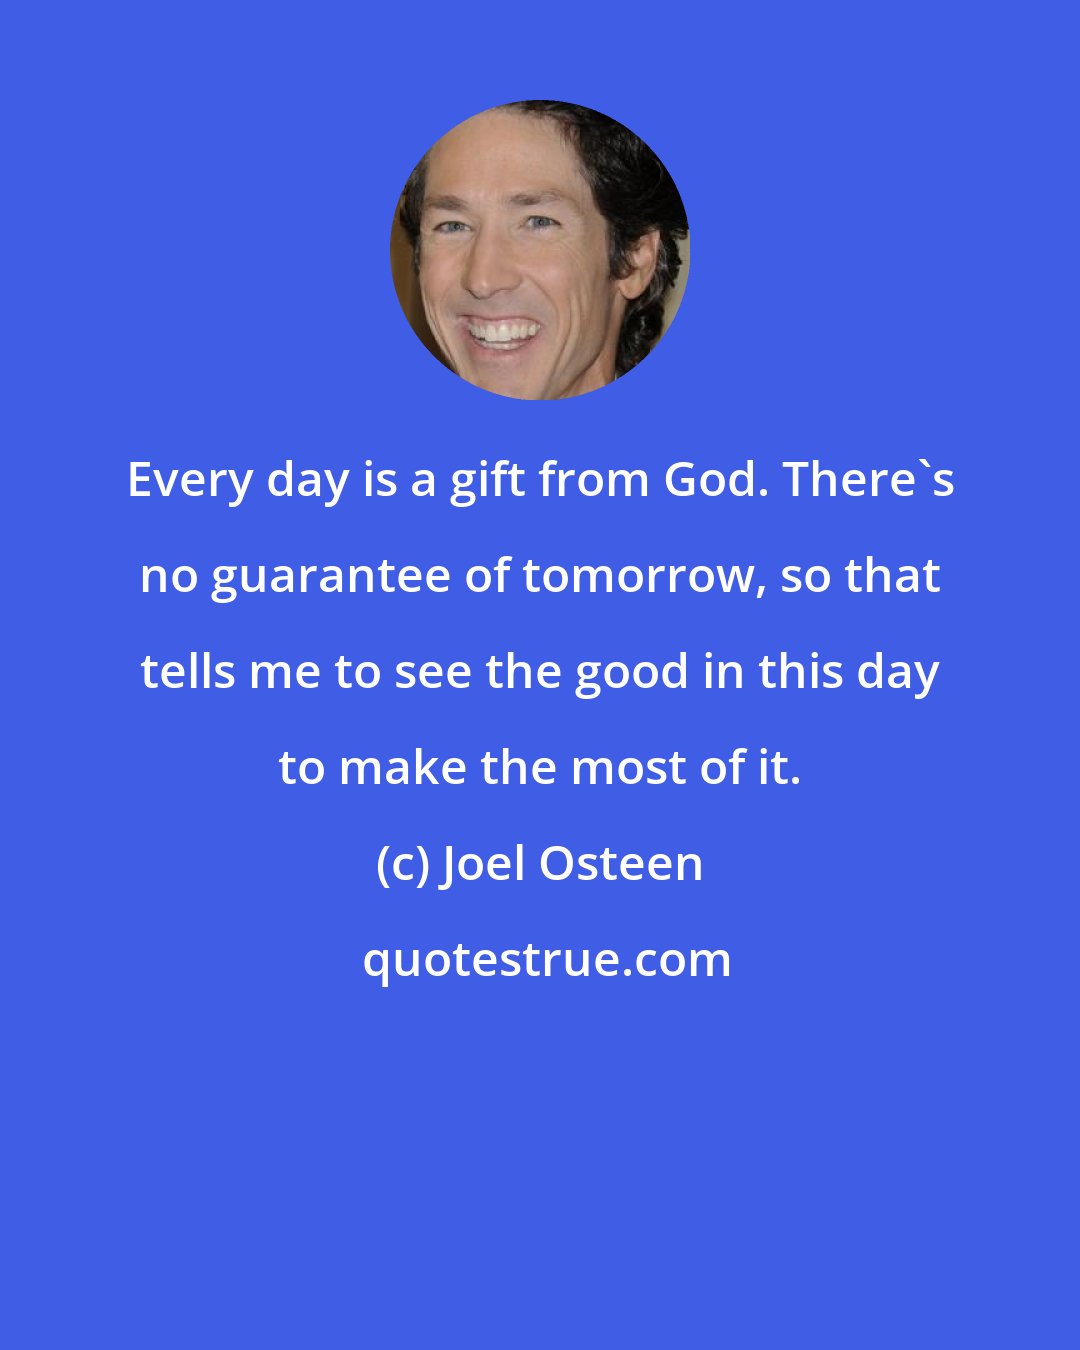 Joel Osteen: Every day is a gift from God. There's no guarantee of tomorrow, so that tells me to see the good in this day to make the most of it.